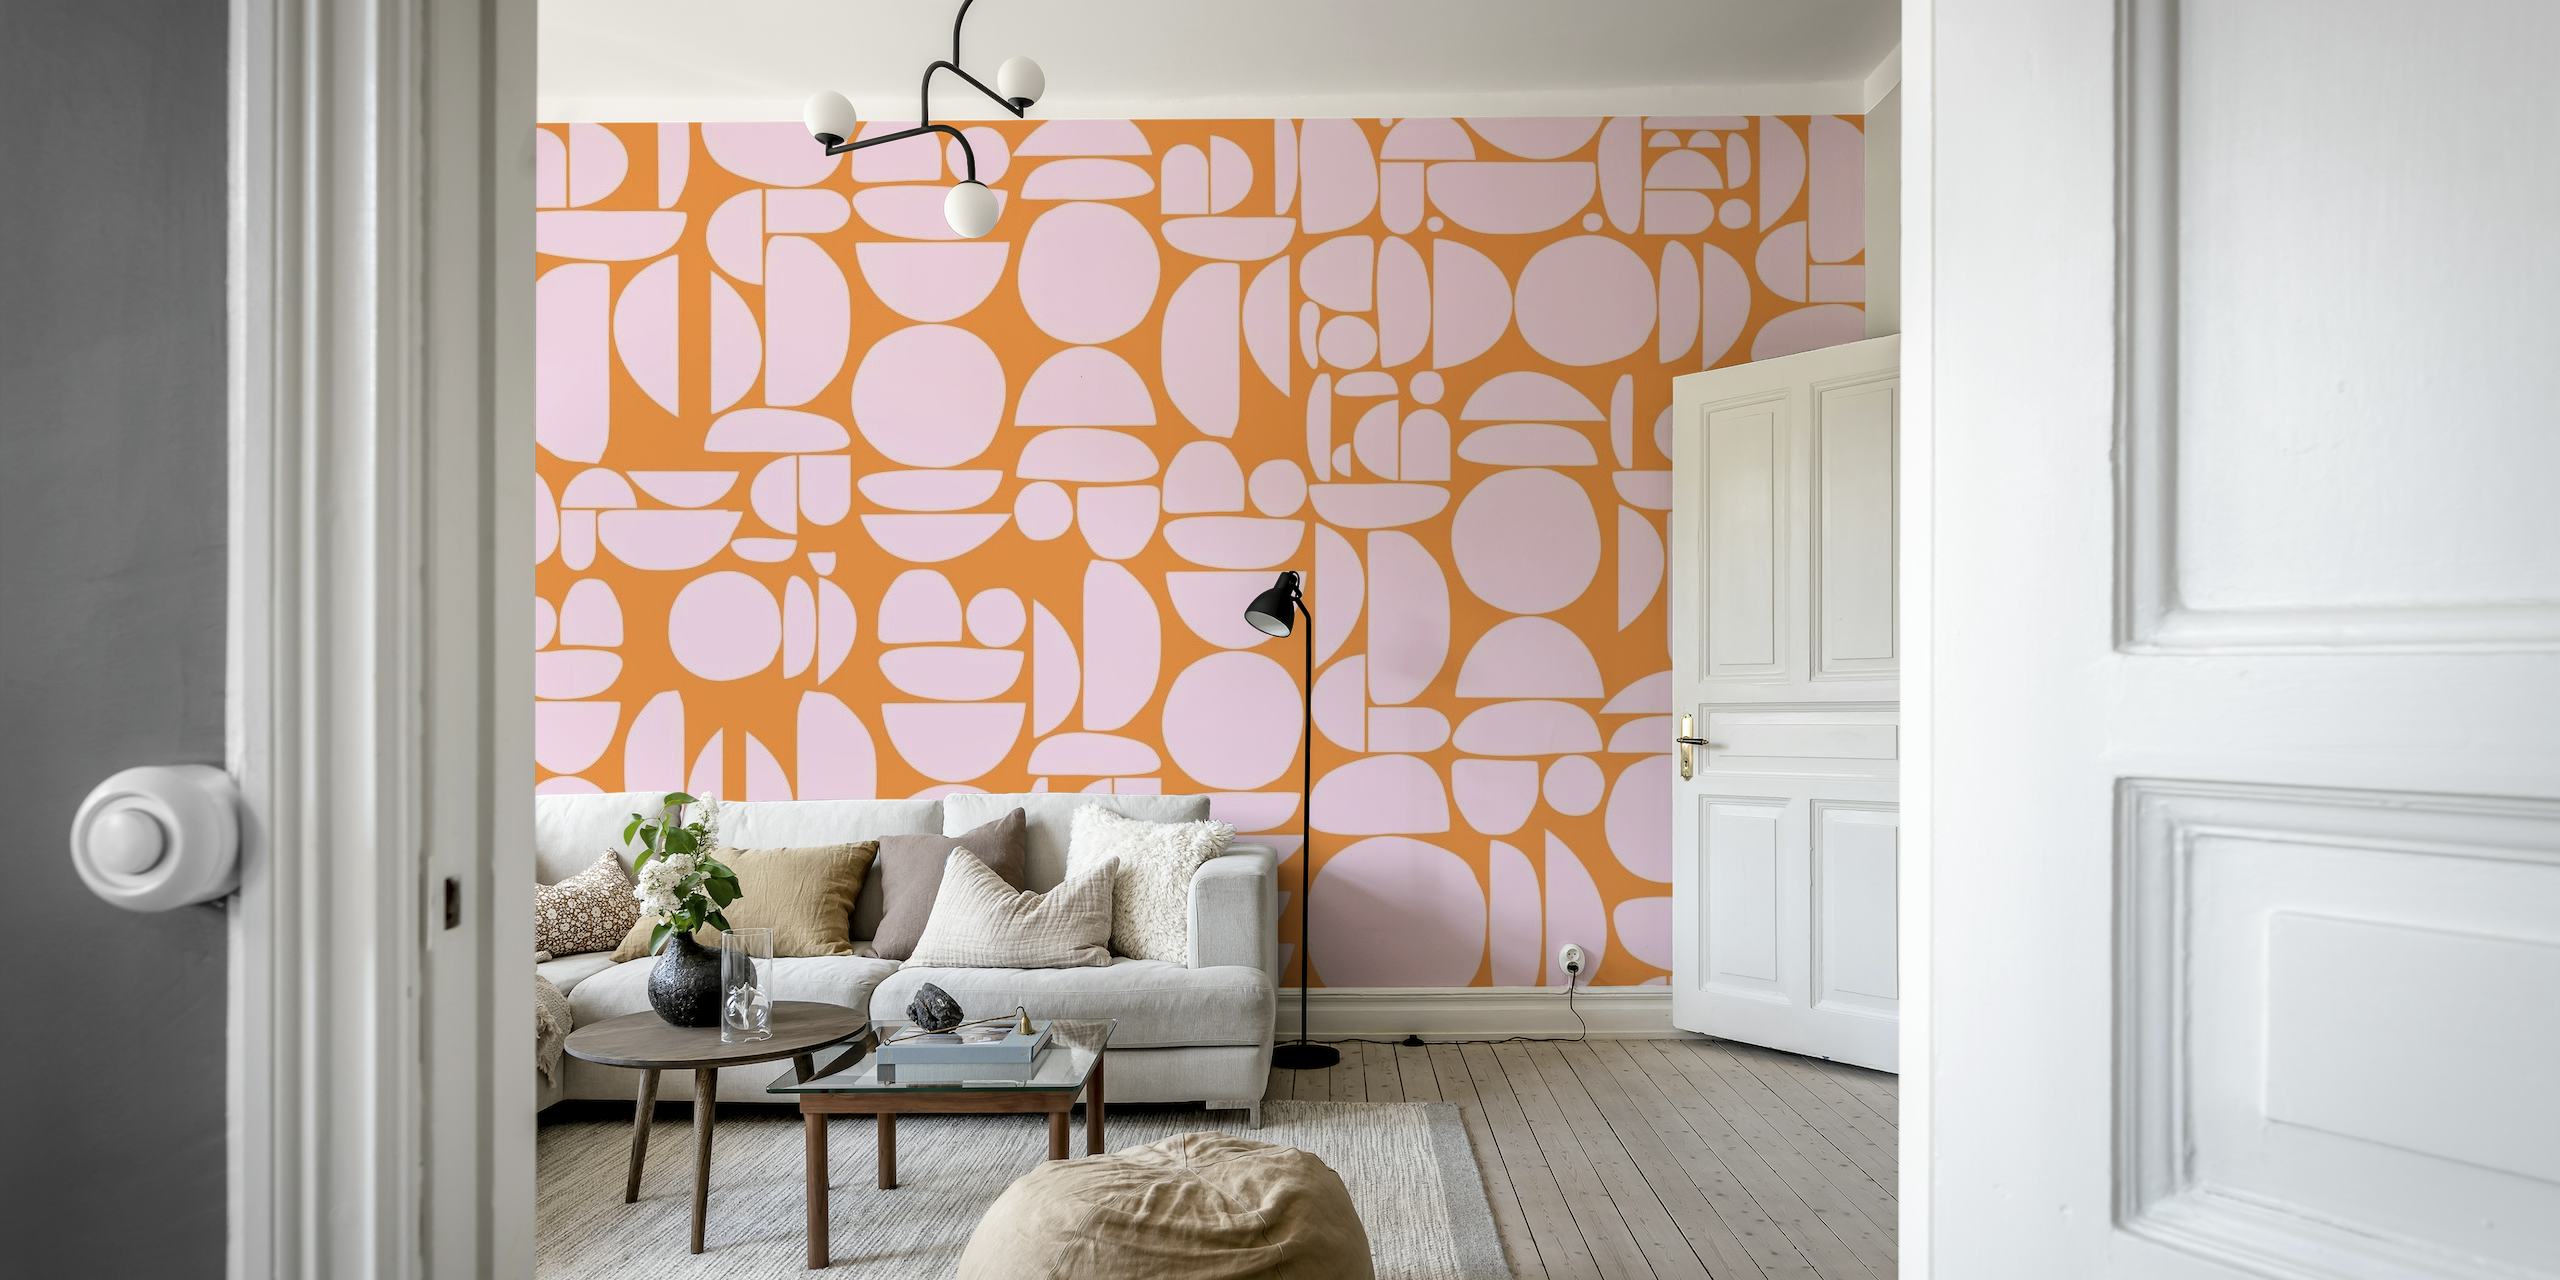 Abstract orange and pink cutout round shapes wall mural design